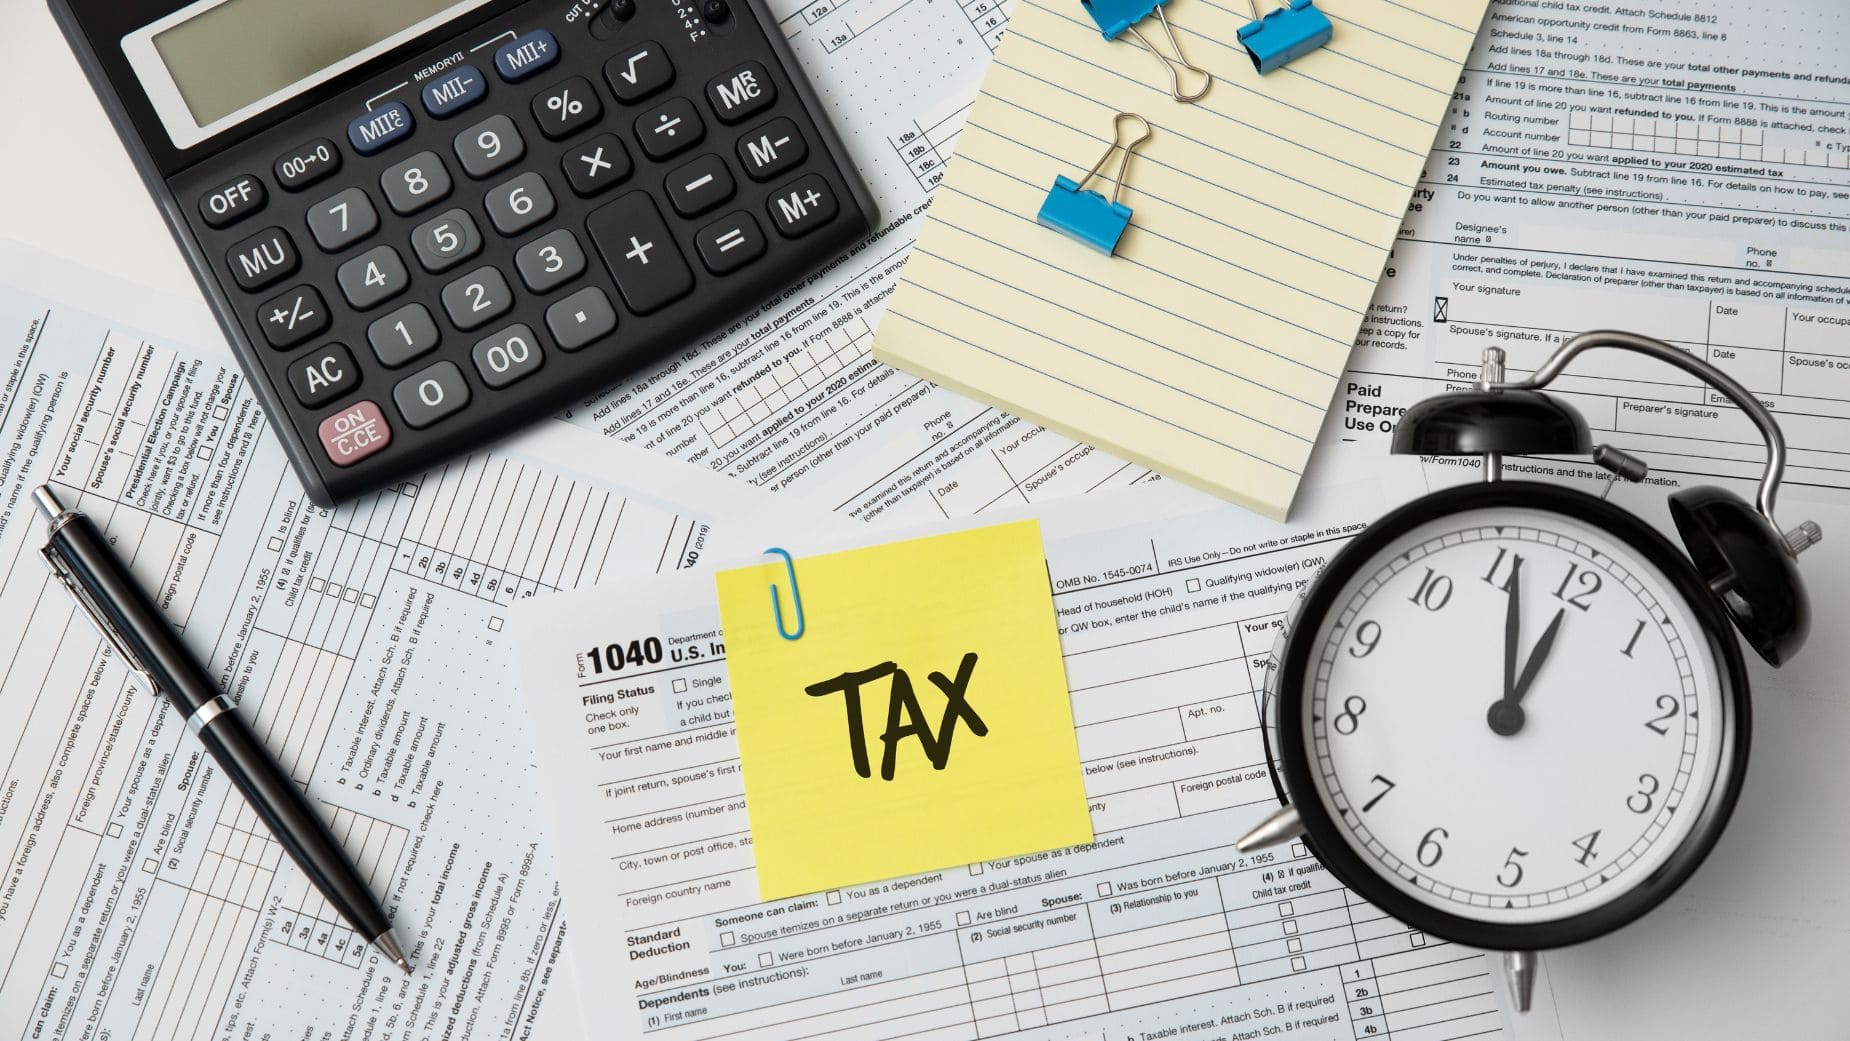 You have to be ready for the Tax Season of the IRS